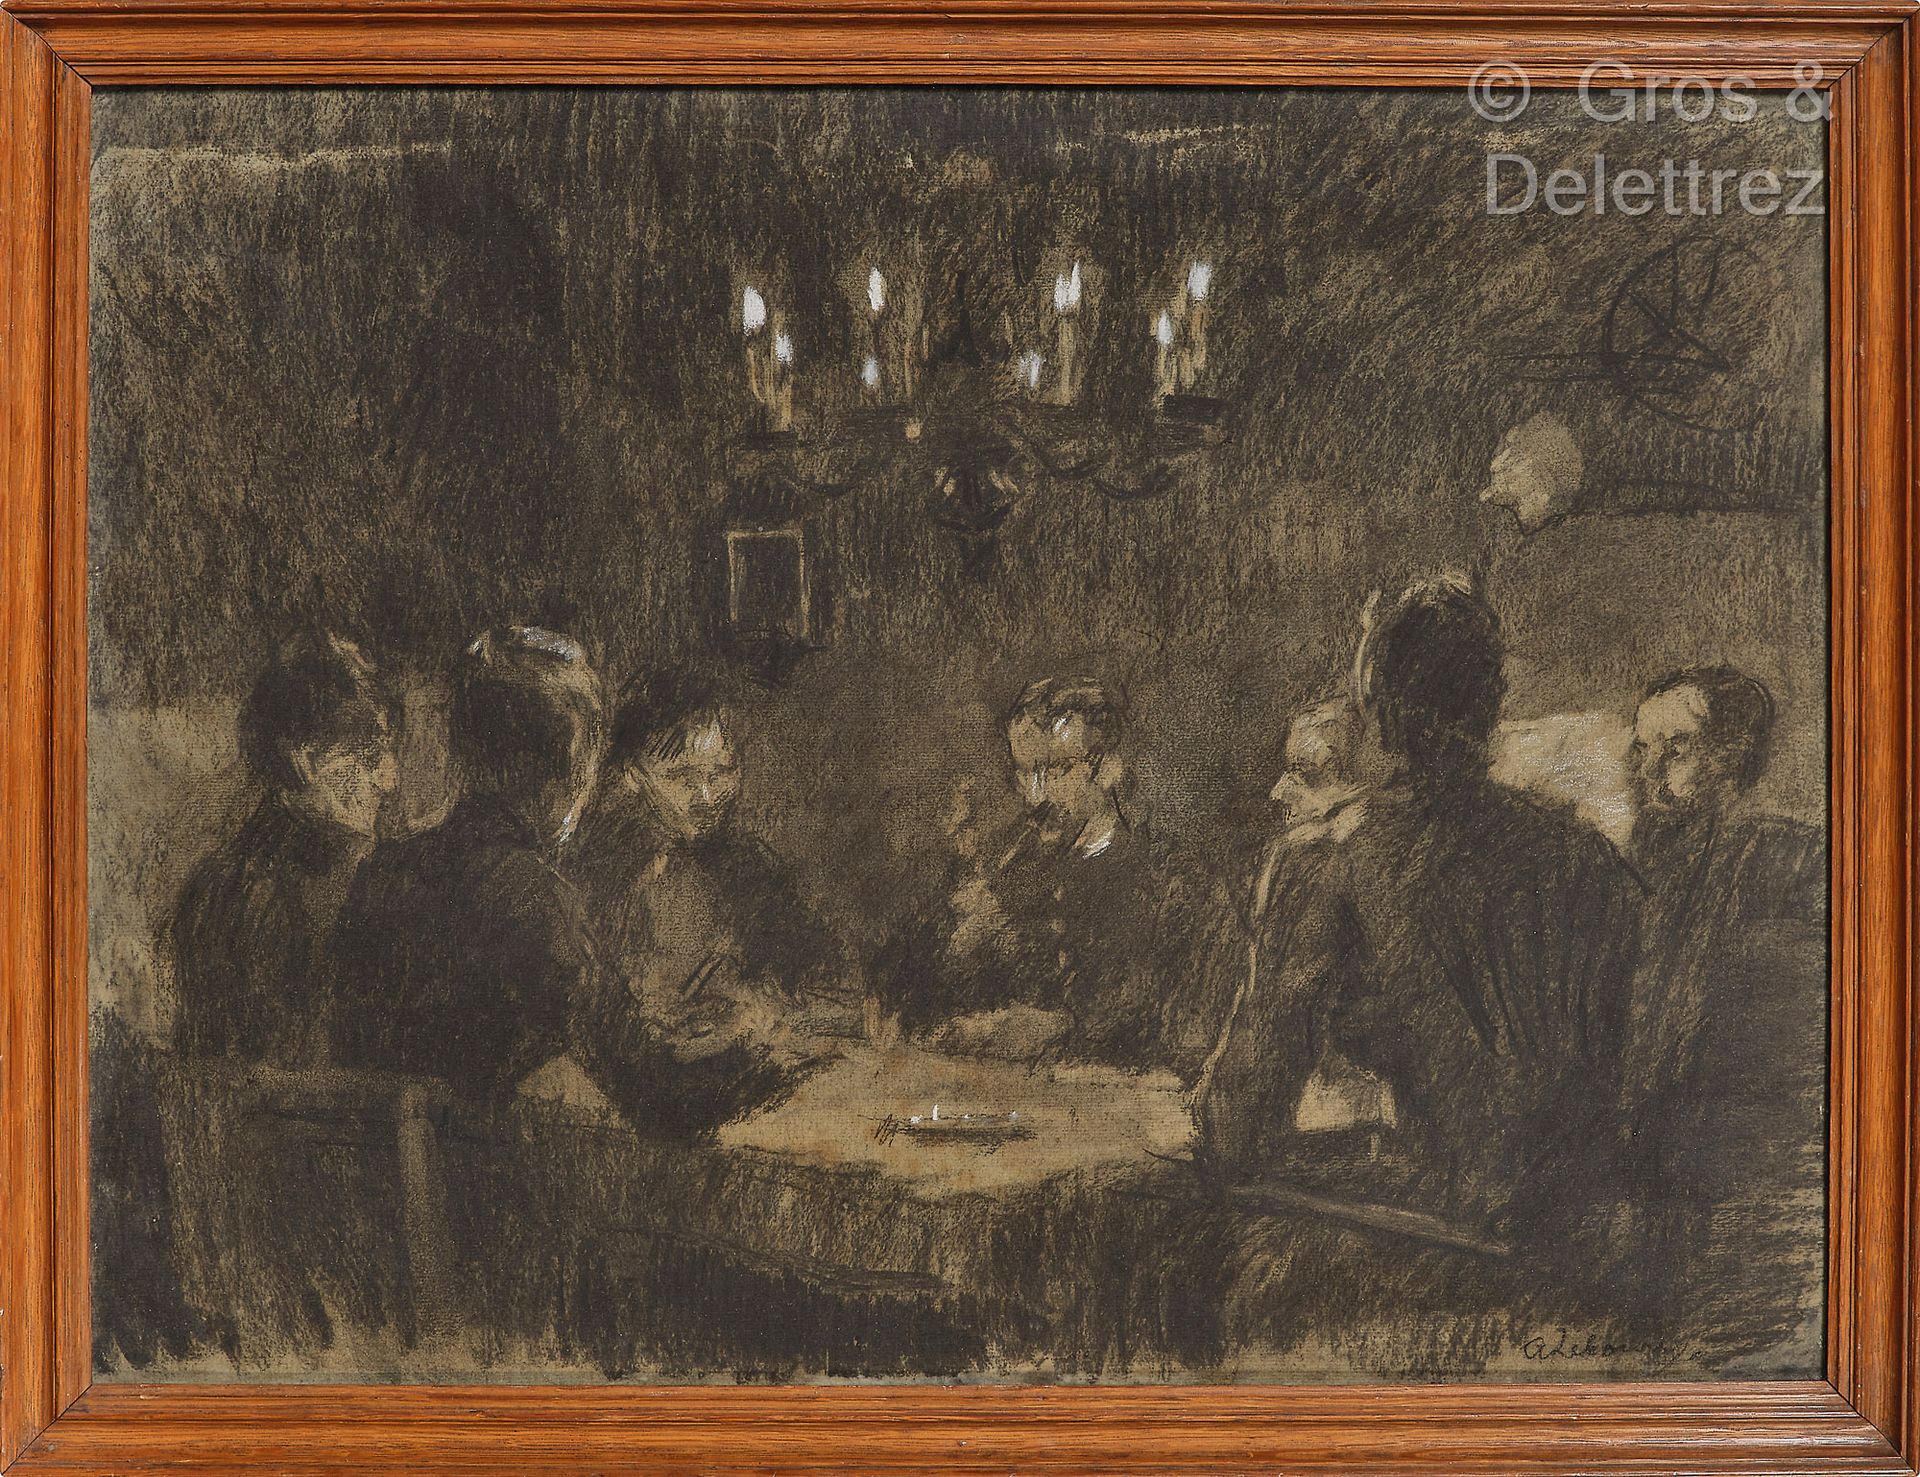 Albert Marie LEBOURG (1849-1928) Family Reunion

Charcoal and etching on paper.
&hellip;